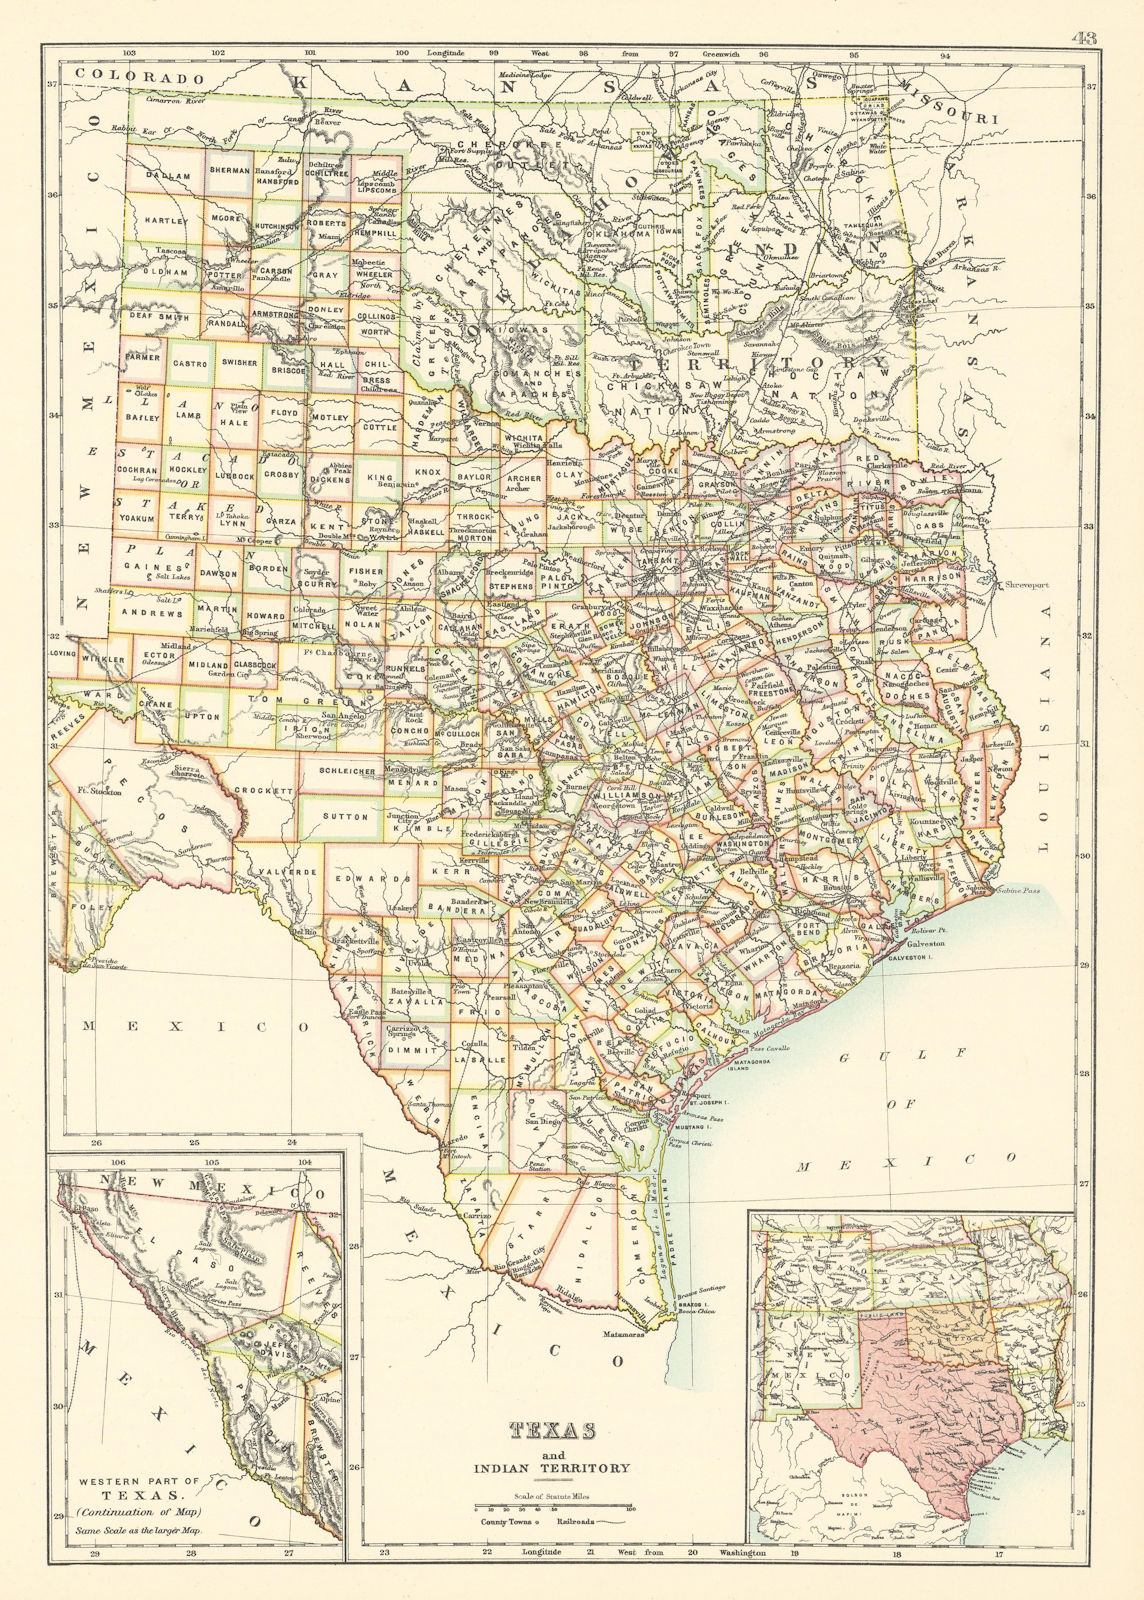 Texas and Indian Territory state maps showing counties. BARTHOLOMEW 1898